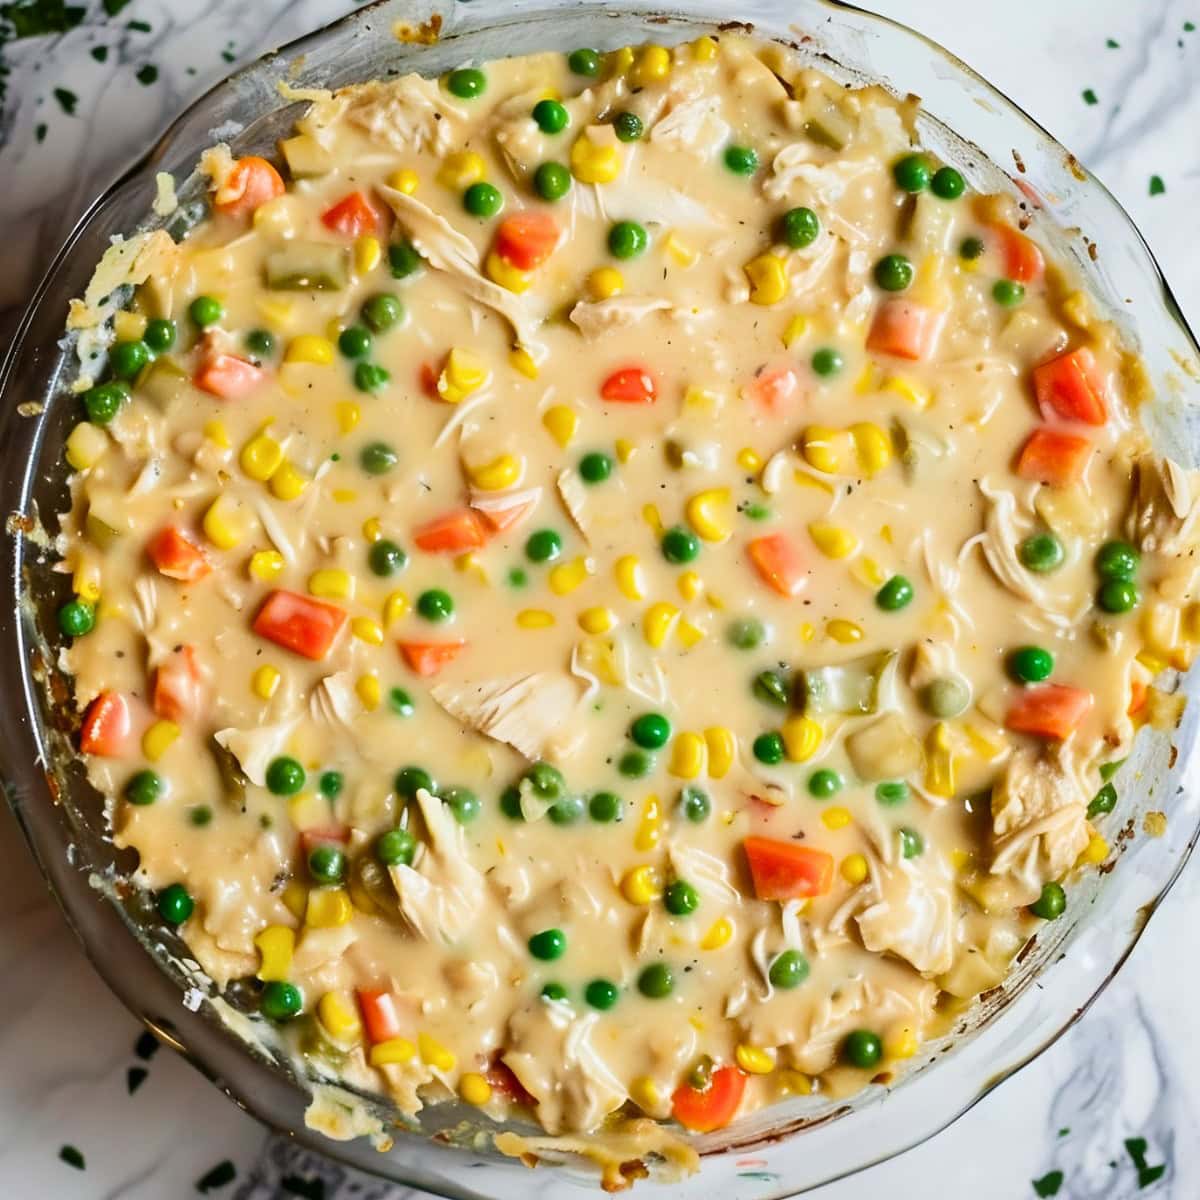 Top View of Bisquick Chicken Pot Pie Filling without the Crust in a Pie Dish 